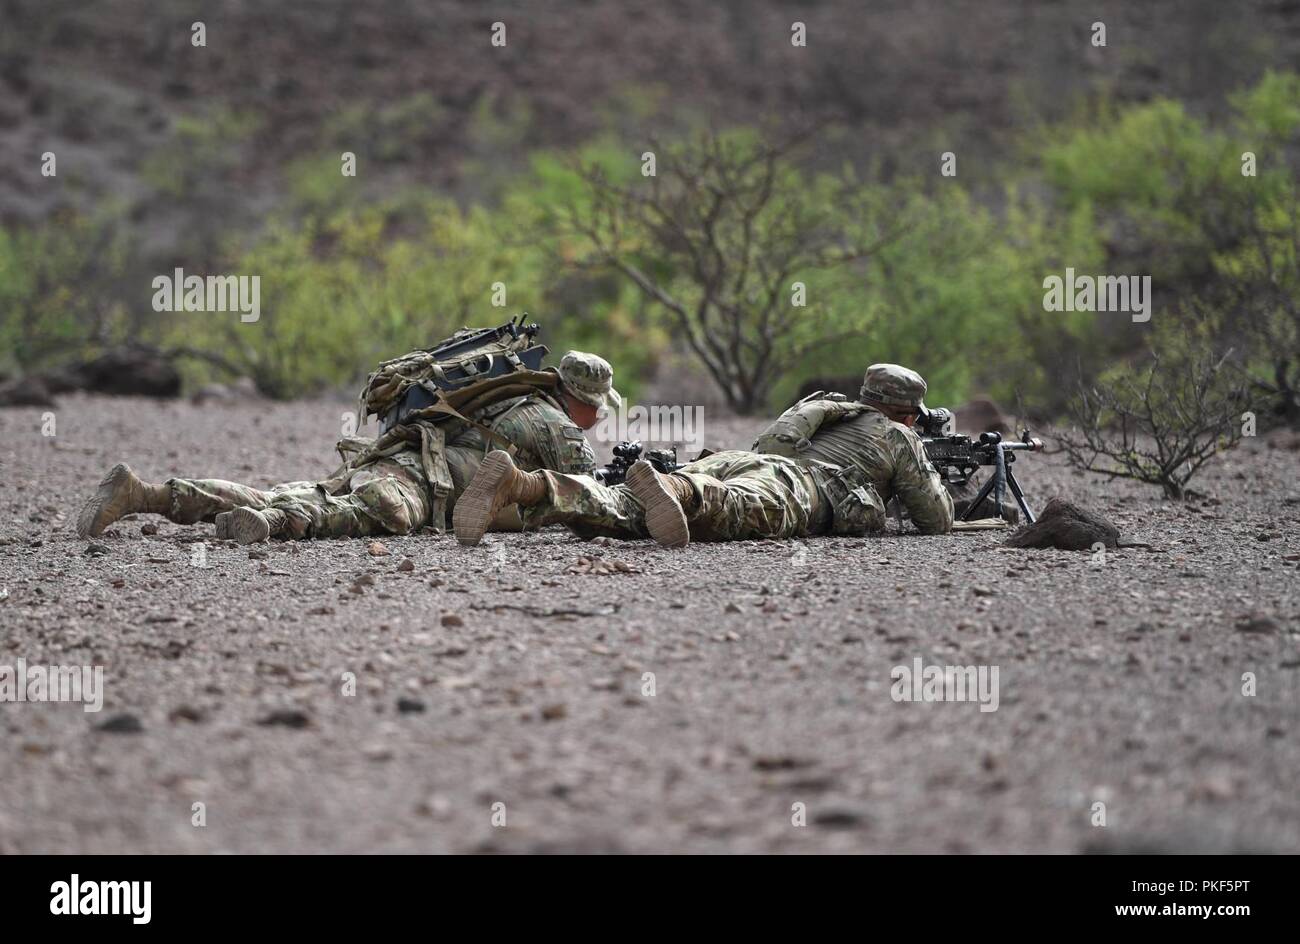 10th Mountain Division soldiers provide security during a Situational Training Exercise on July 31, 2018, at a range in Arta, Djibouti. 10th Mountain Division soldiers use STX as a way to practice moving and maneuvering, and calling in medical evacuations and artillery fire. By staying proficient in these skills, they are better prepared to deploy forces to protect American interests on the continent of Africa as part of the East Africa Response Force. Stock Photo